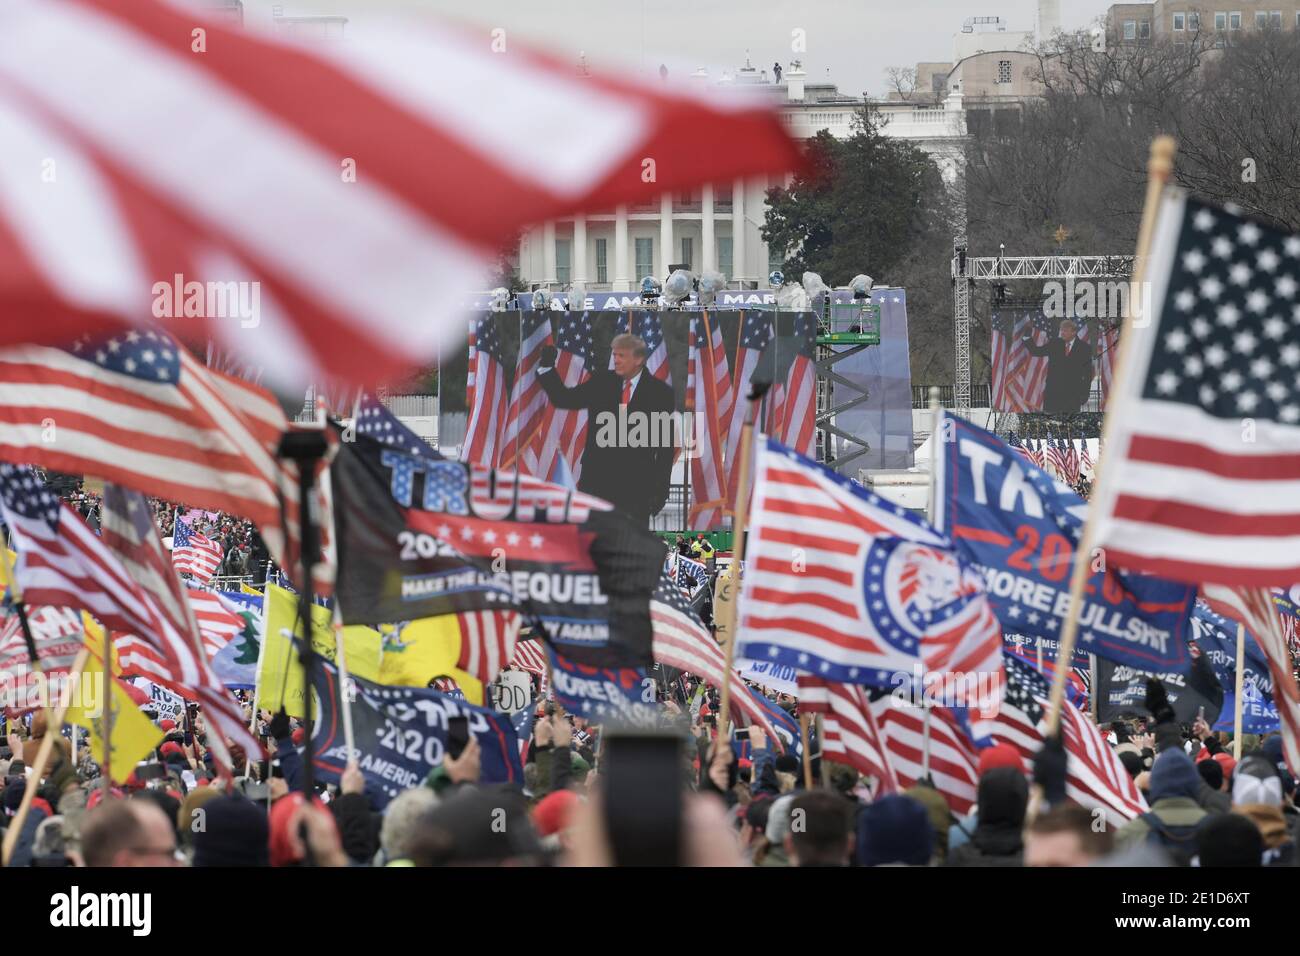 Washington, USA. 06th Jan, 2021. President Donald trump delivers remarks during a rally Save America March, today on January 06, 2021 at White House/Ellipse in Washington DC, USA. (Photo by Lenin Nolly/Sipa USA) Credit: Sipa USA/Alamy Live News Stock Photo